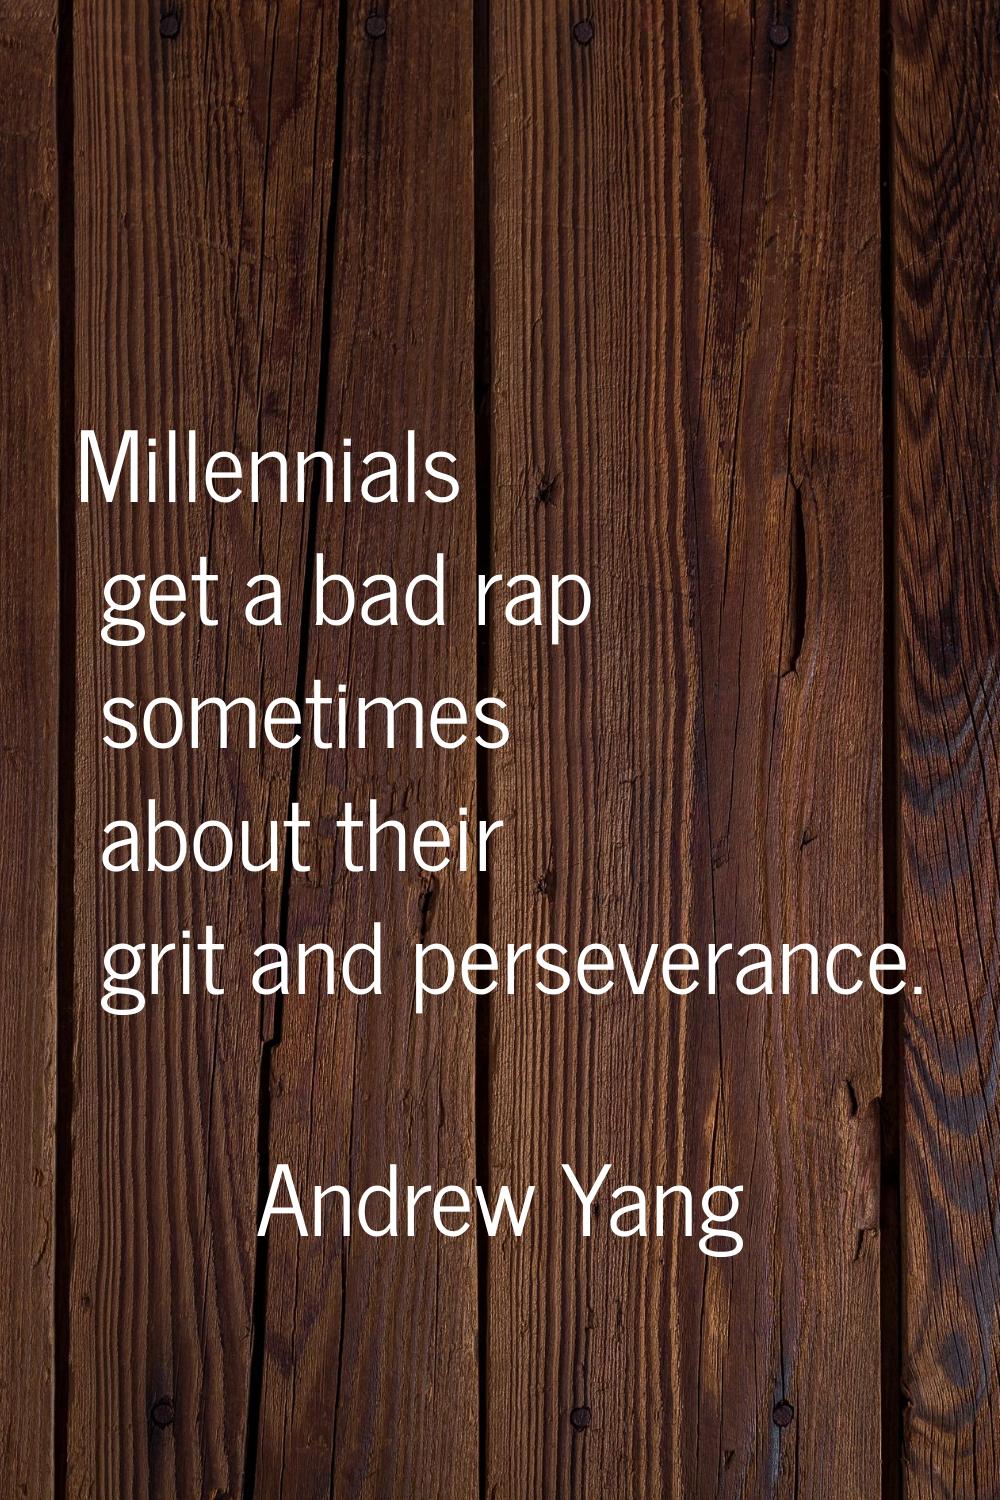 Millennials get a bad rap sometimes about their grit and perseverance.